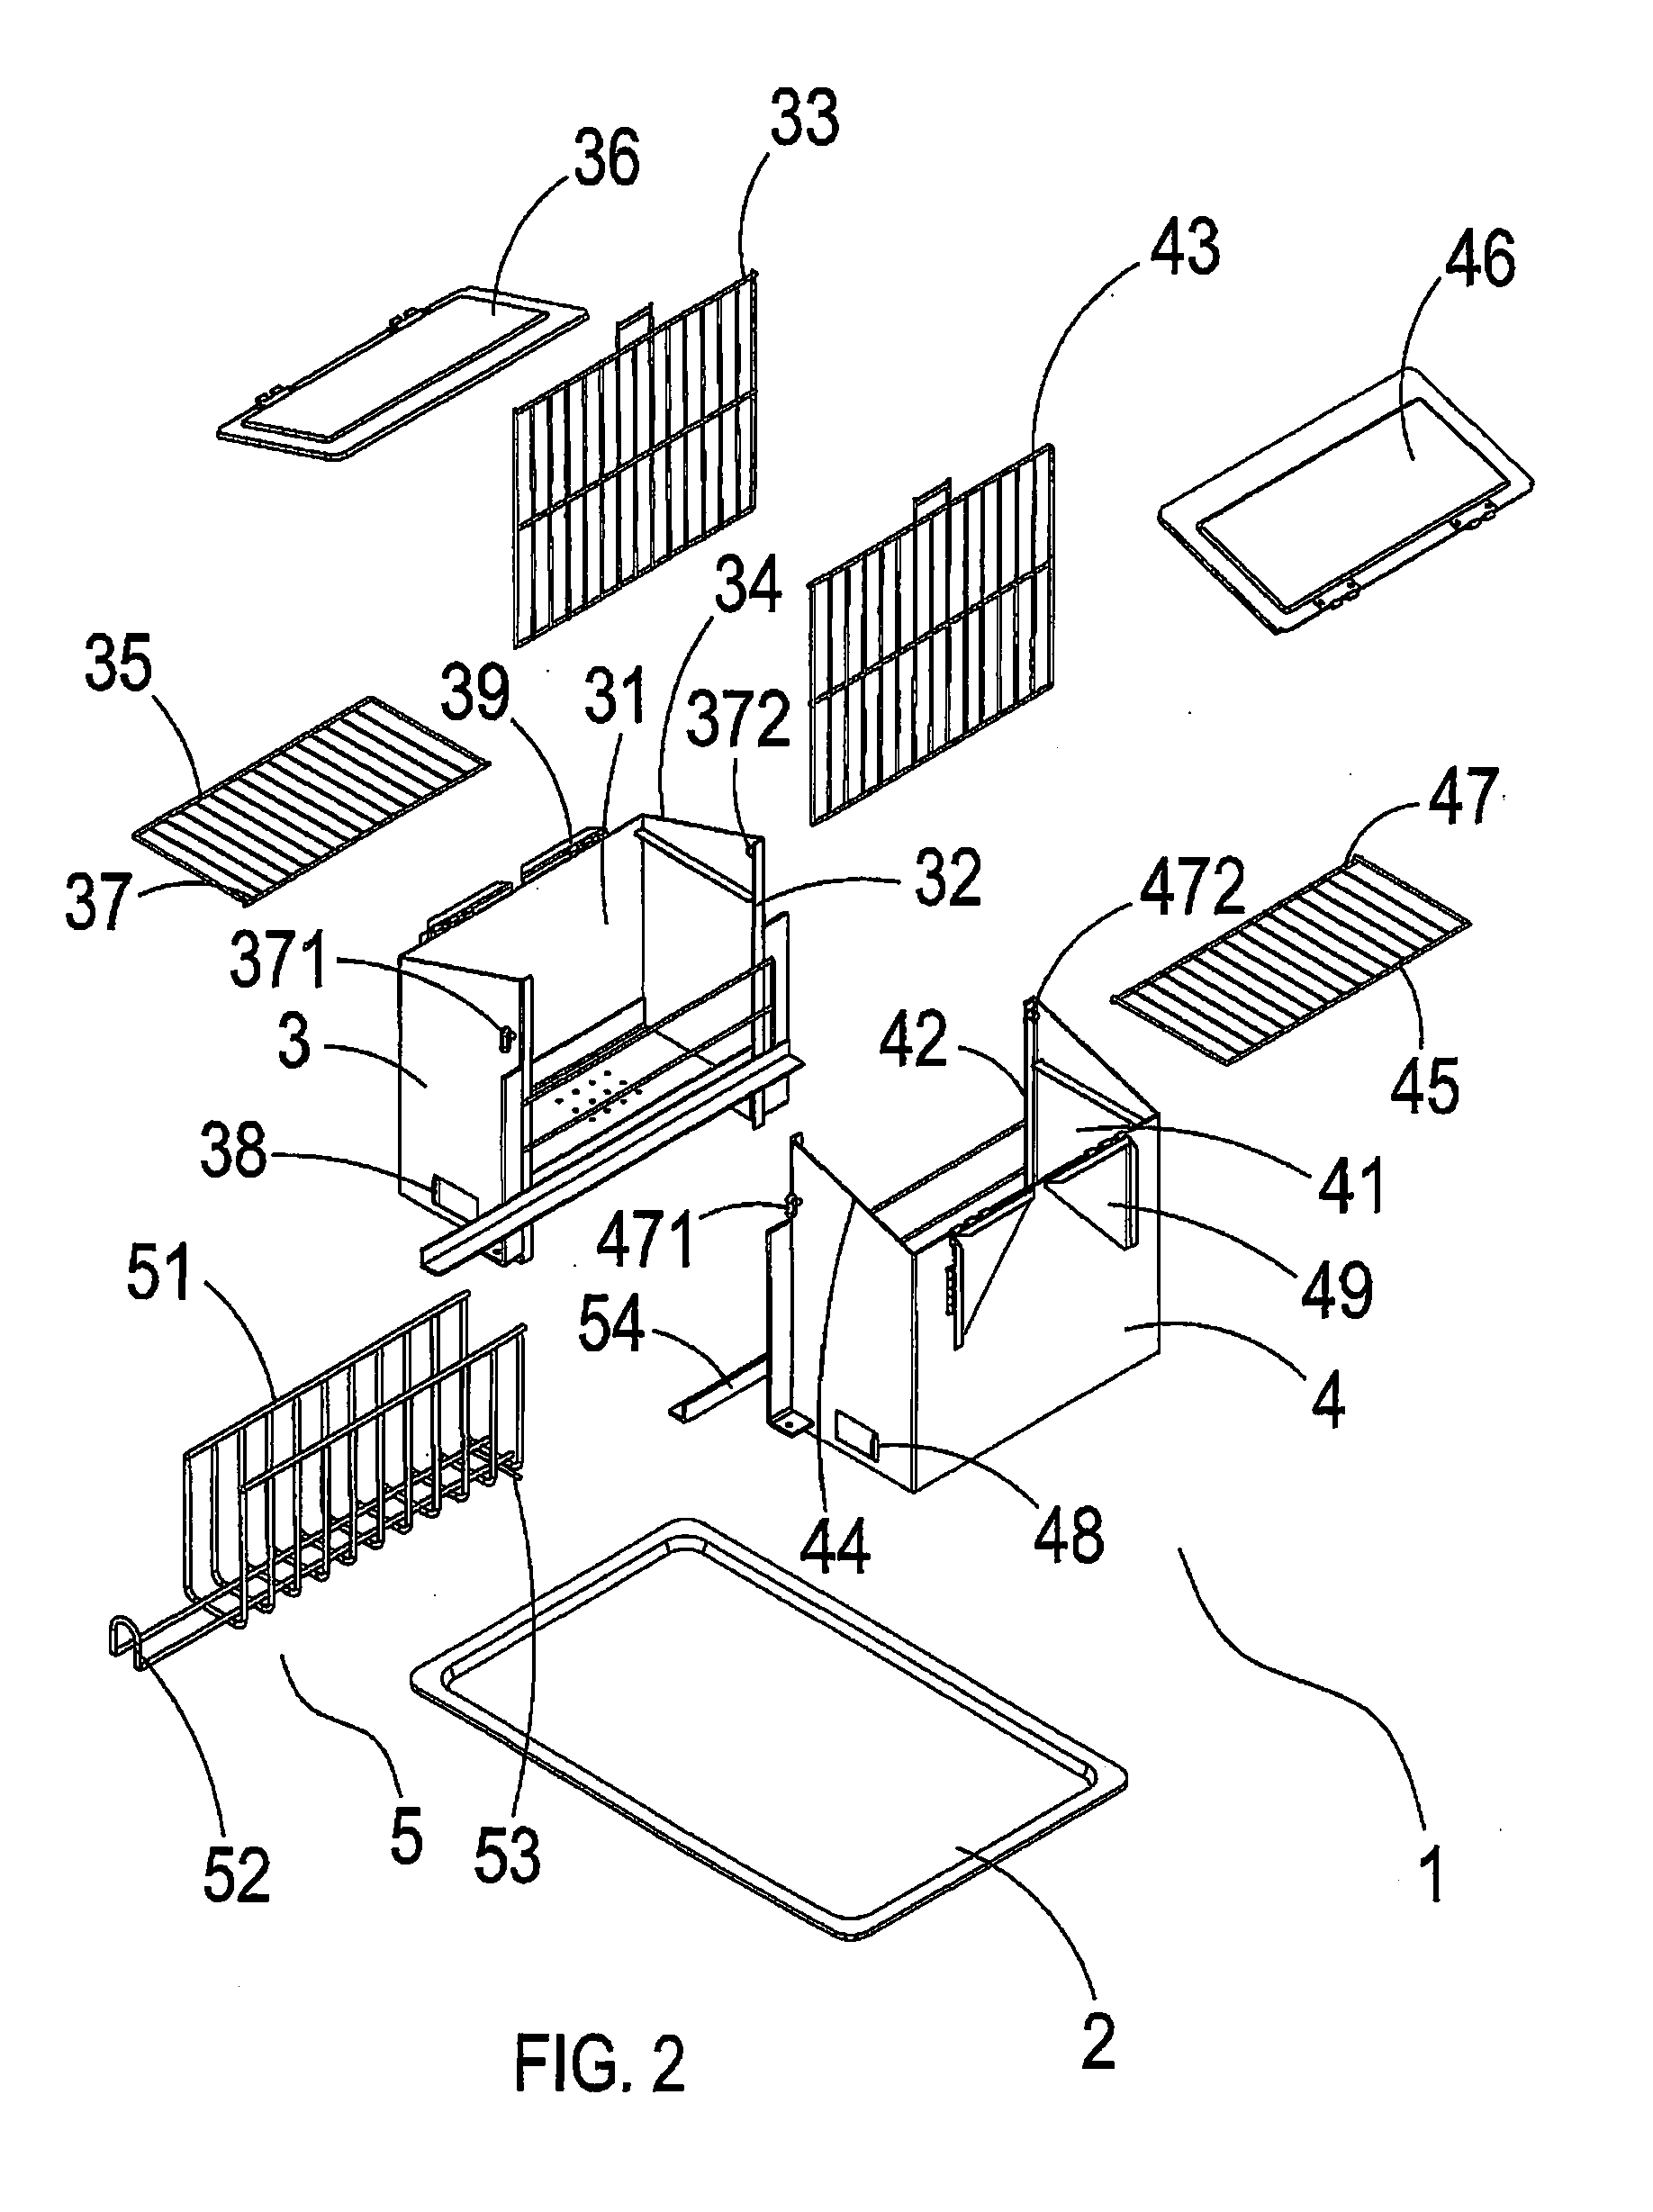 Barbecue grill structure